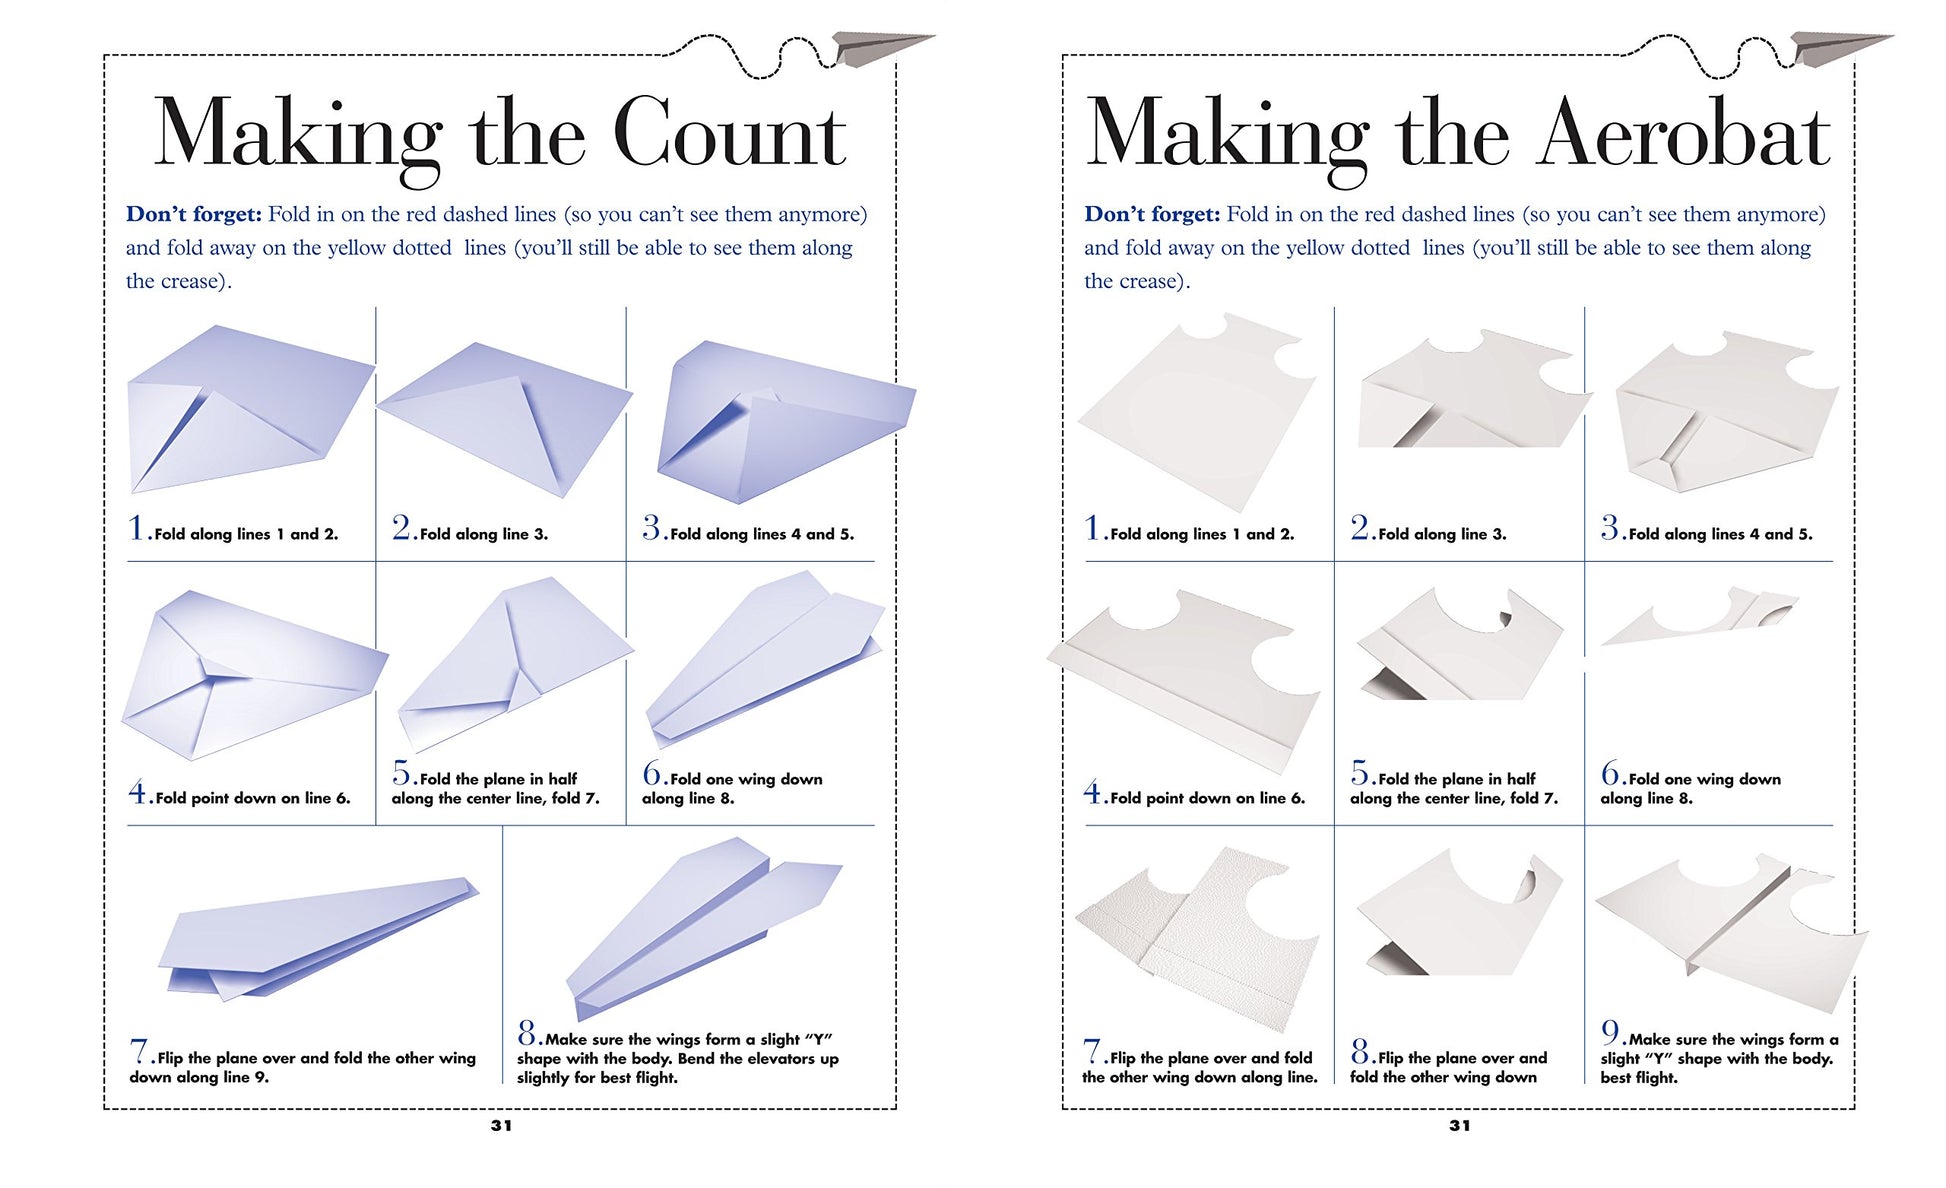 another set of pages with illustrations of folded paper and text instructions